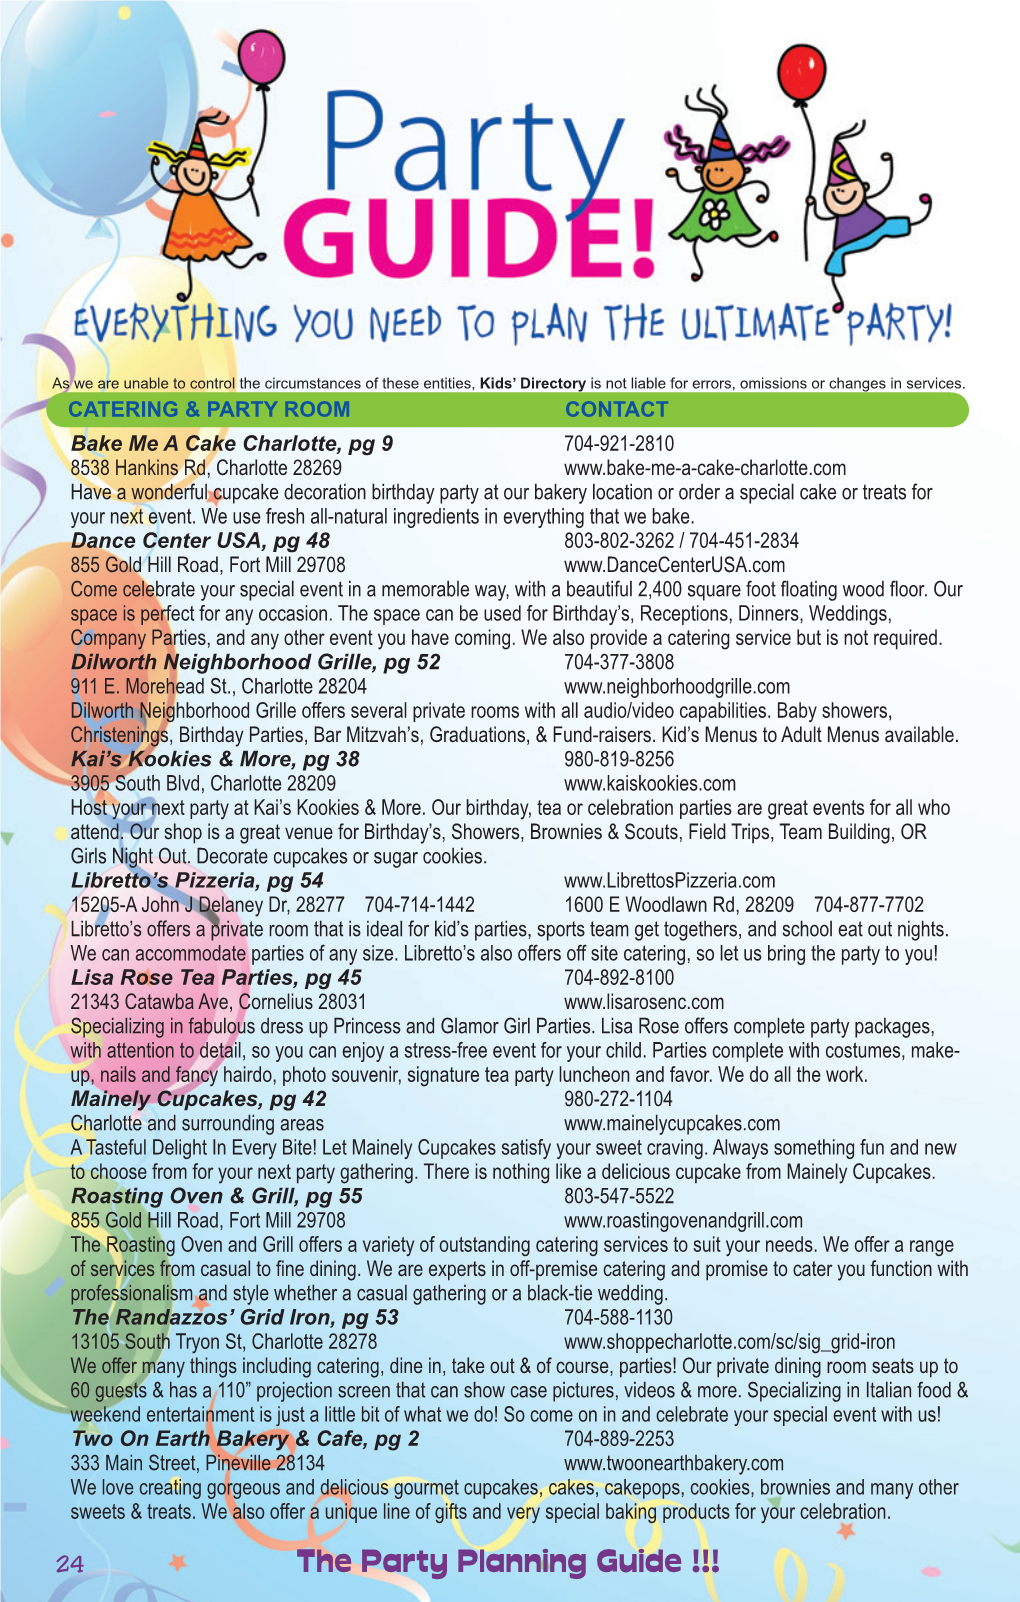 The Party Planning Guide